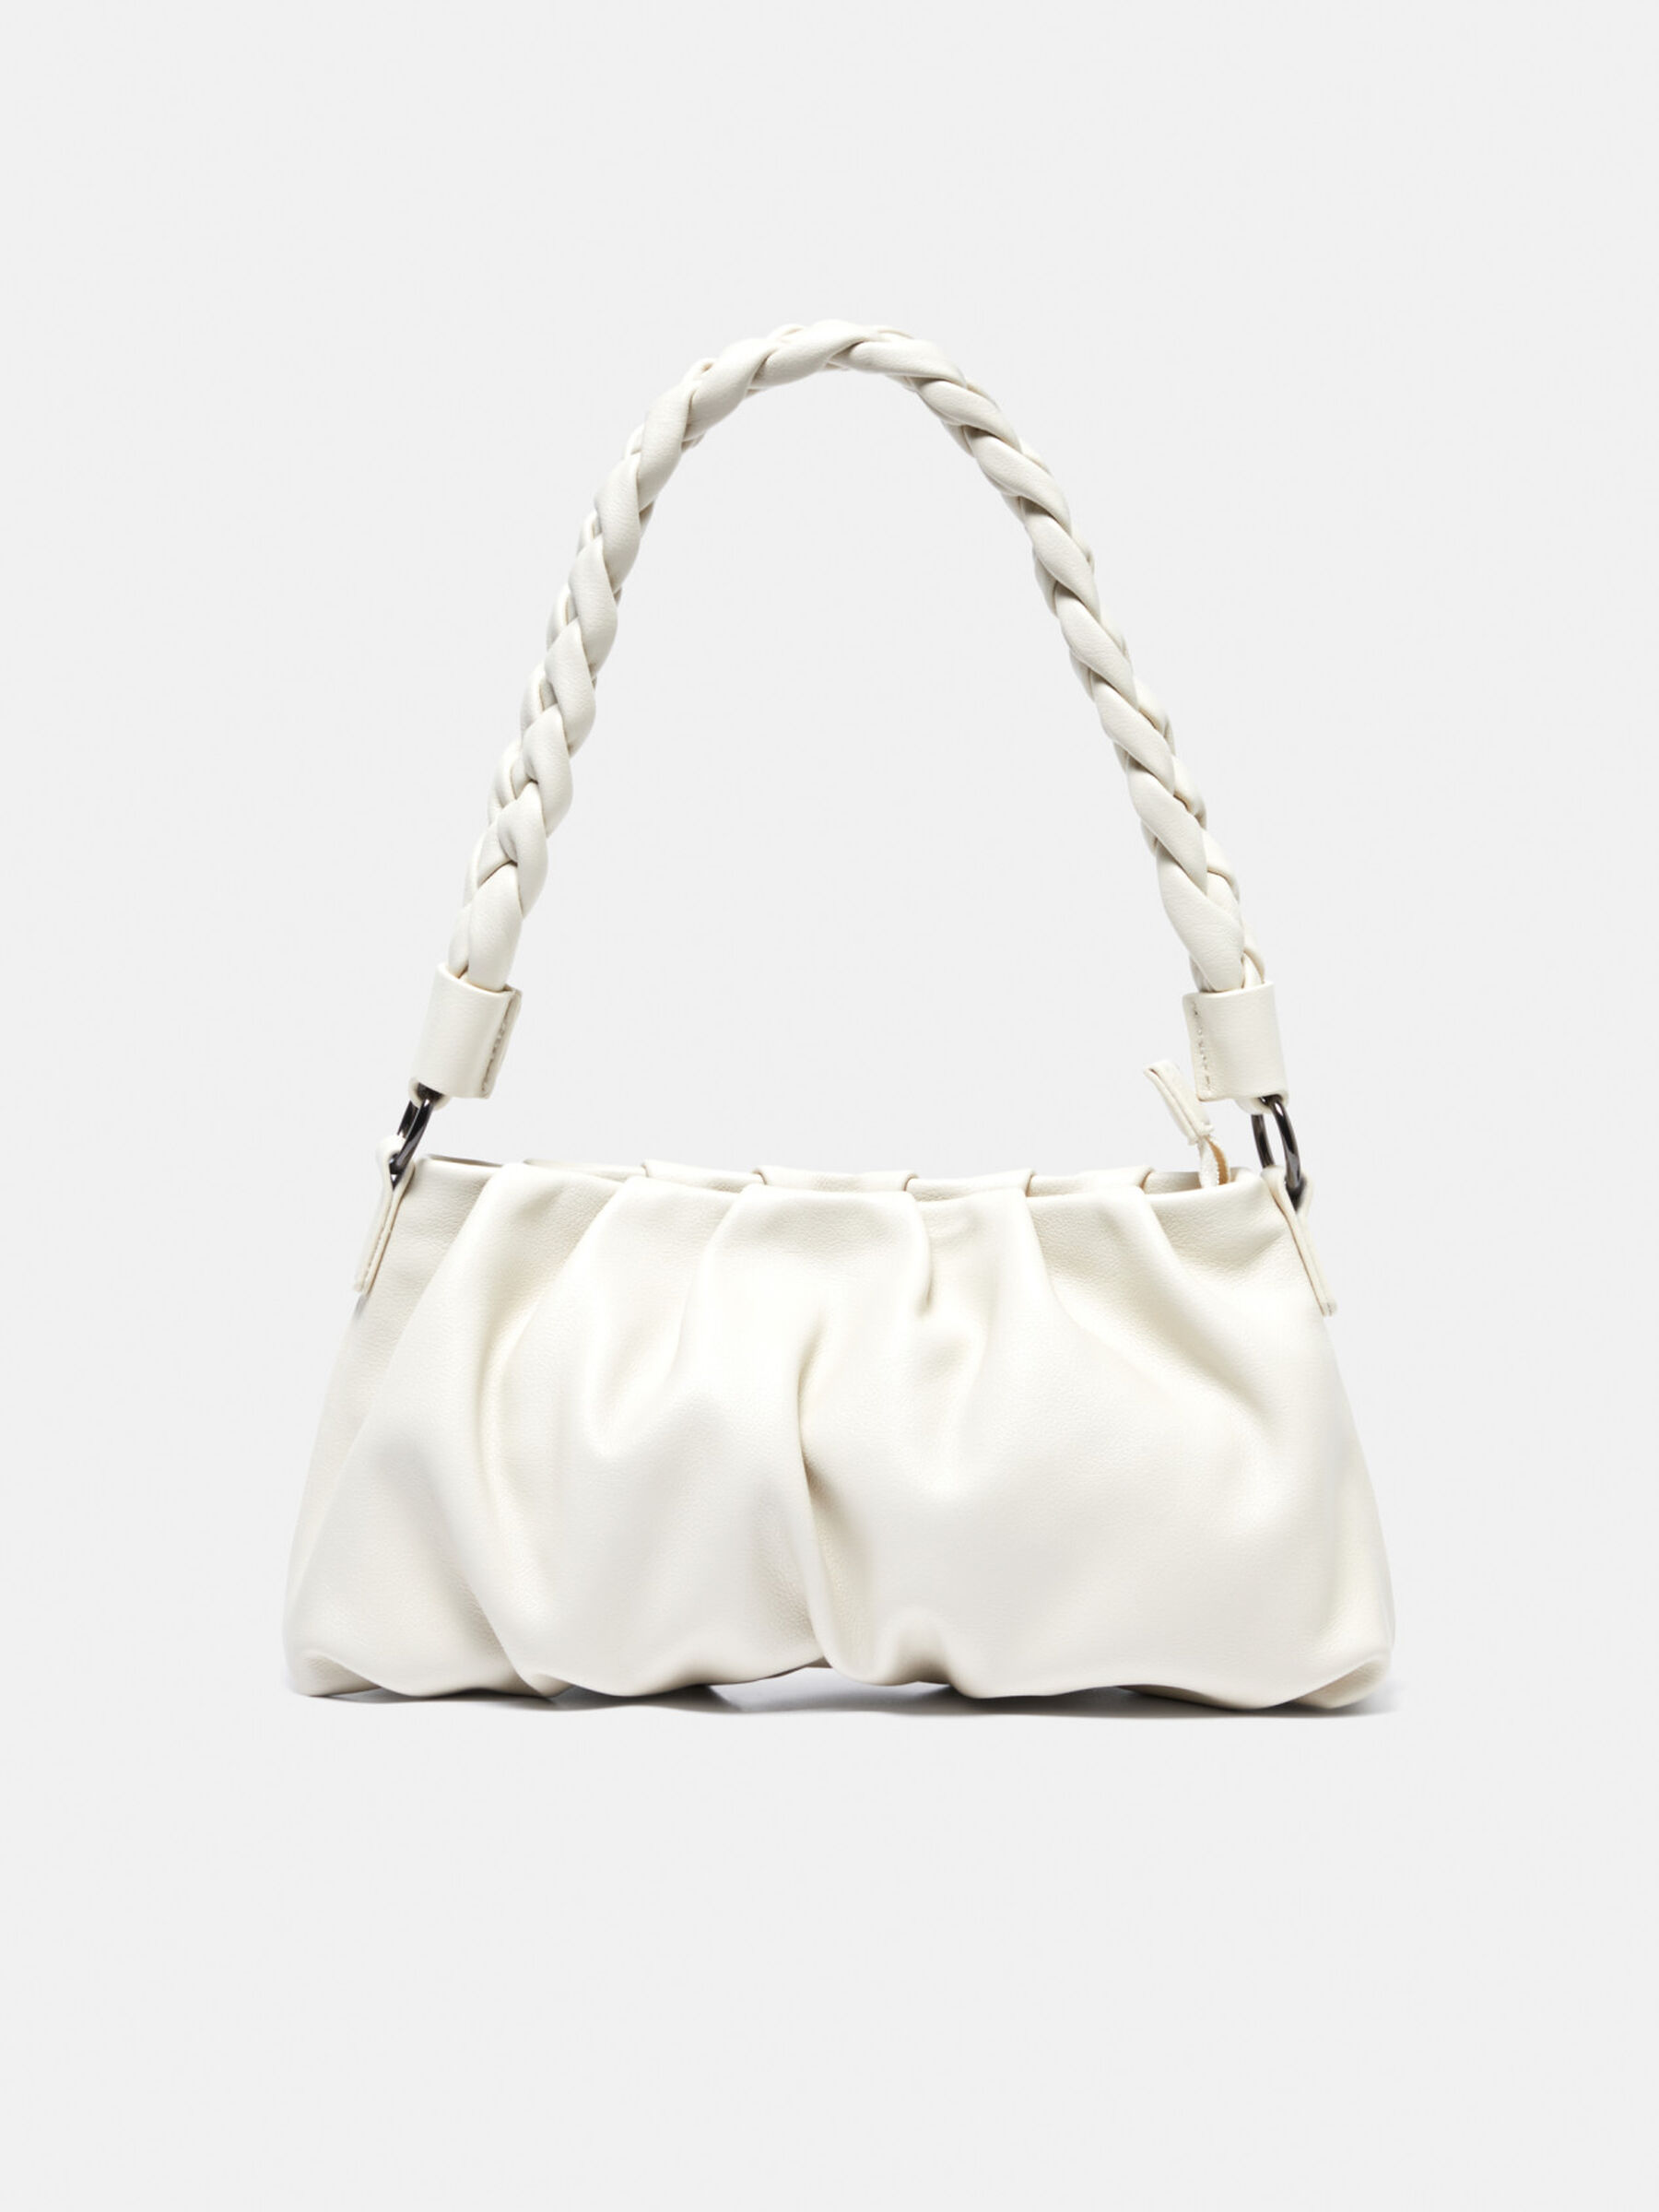 Baguette bag with braided handle, Creamy White - Sisley